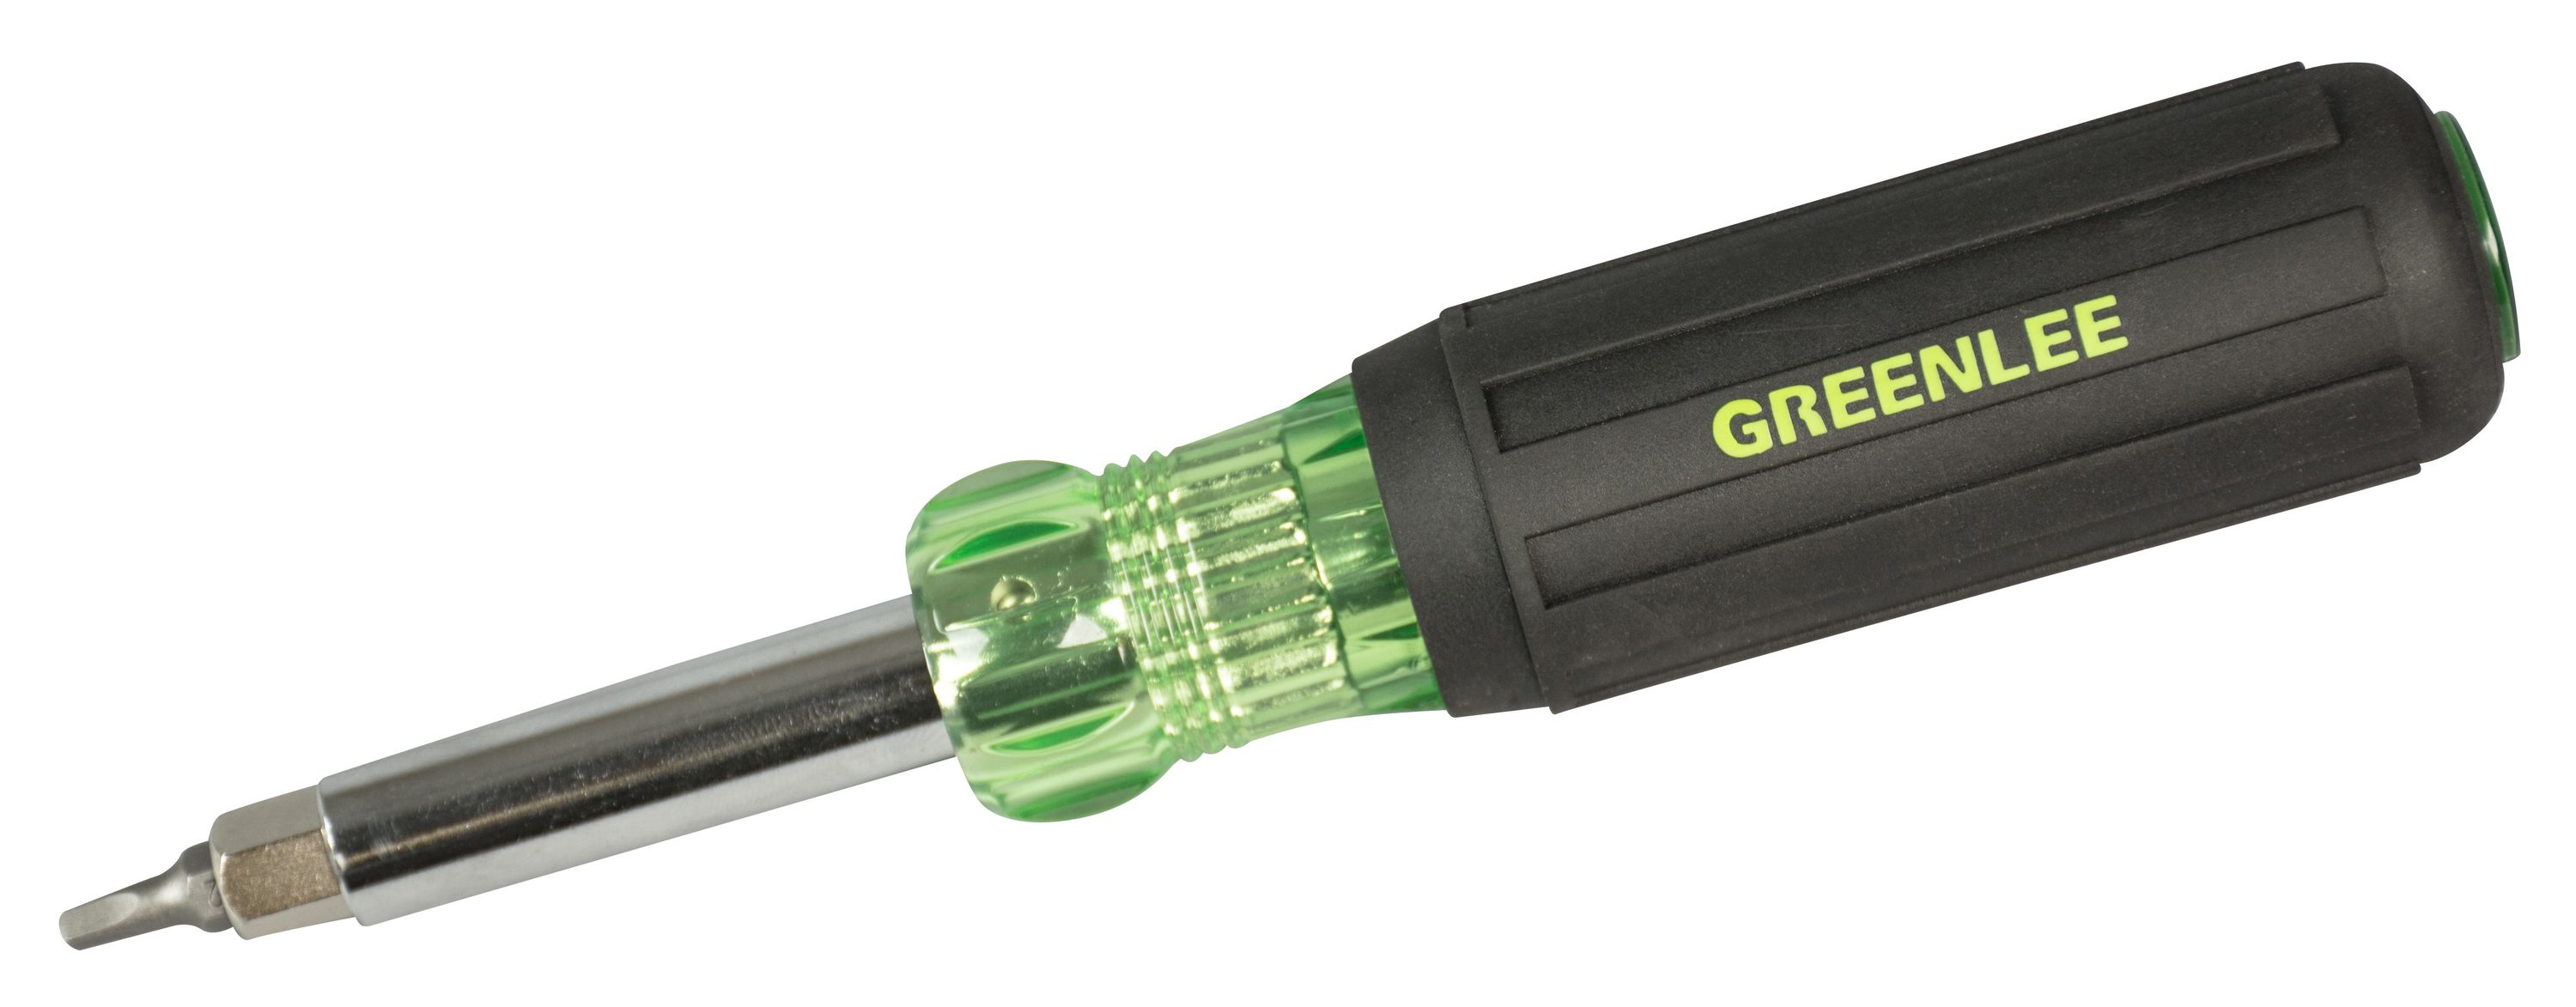 Greenlee 0153-01-INS Insulated Screwdriver Kit, 9-Piece by Greenlee 